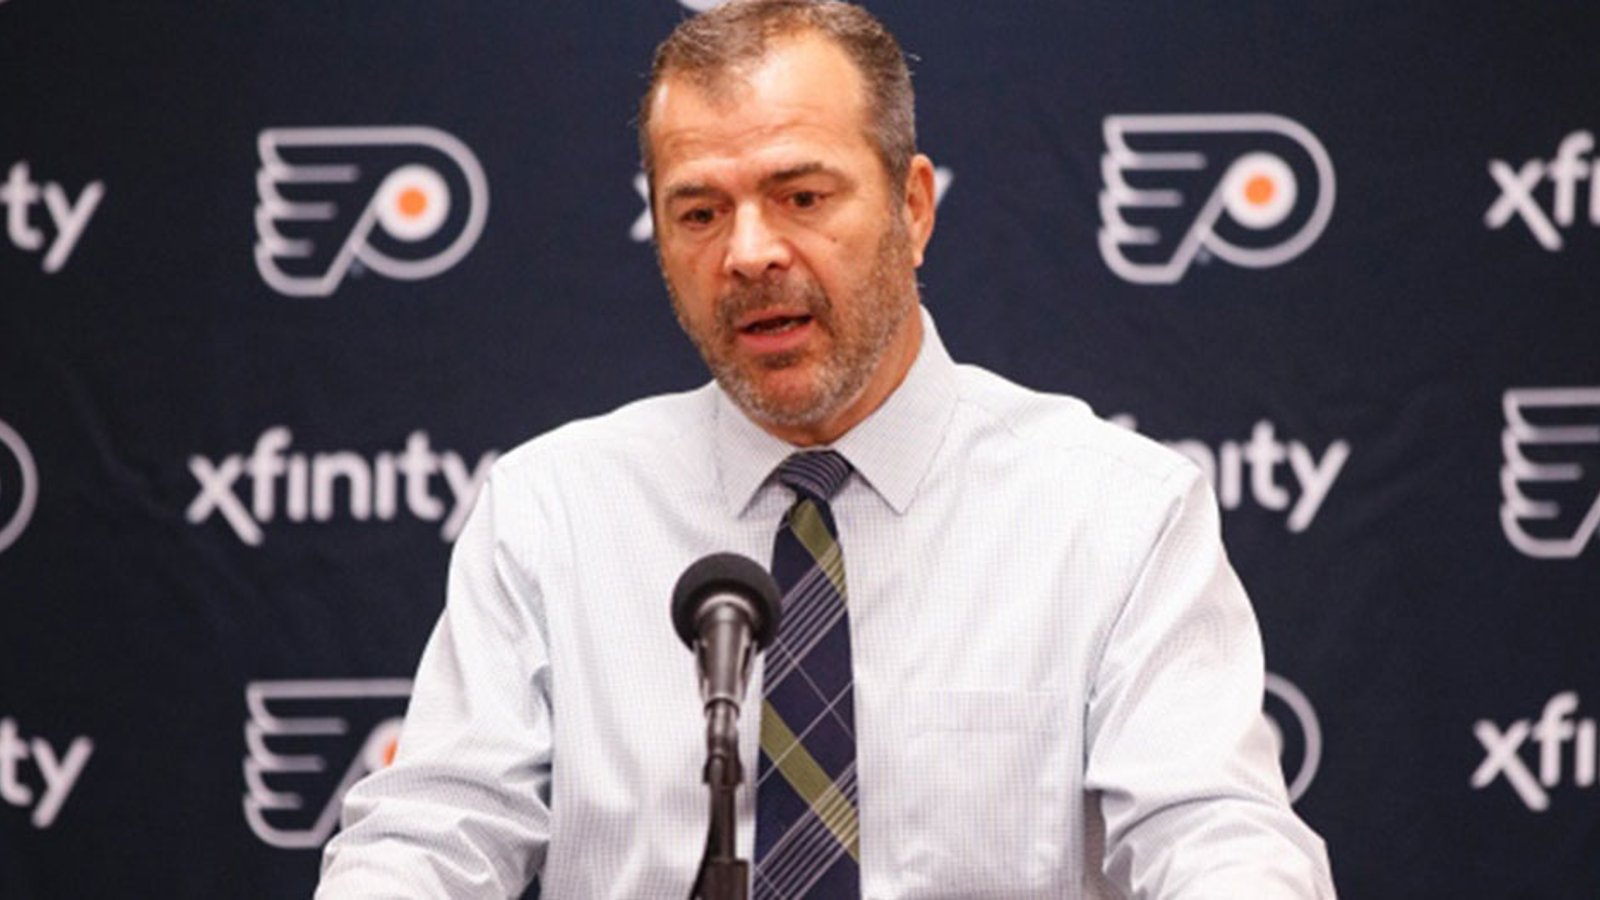 Vigneault goes on bizarre rant, talks about vaccine conspiracies and allegations of Presidential election fraud